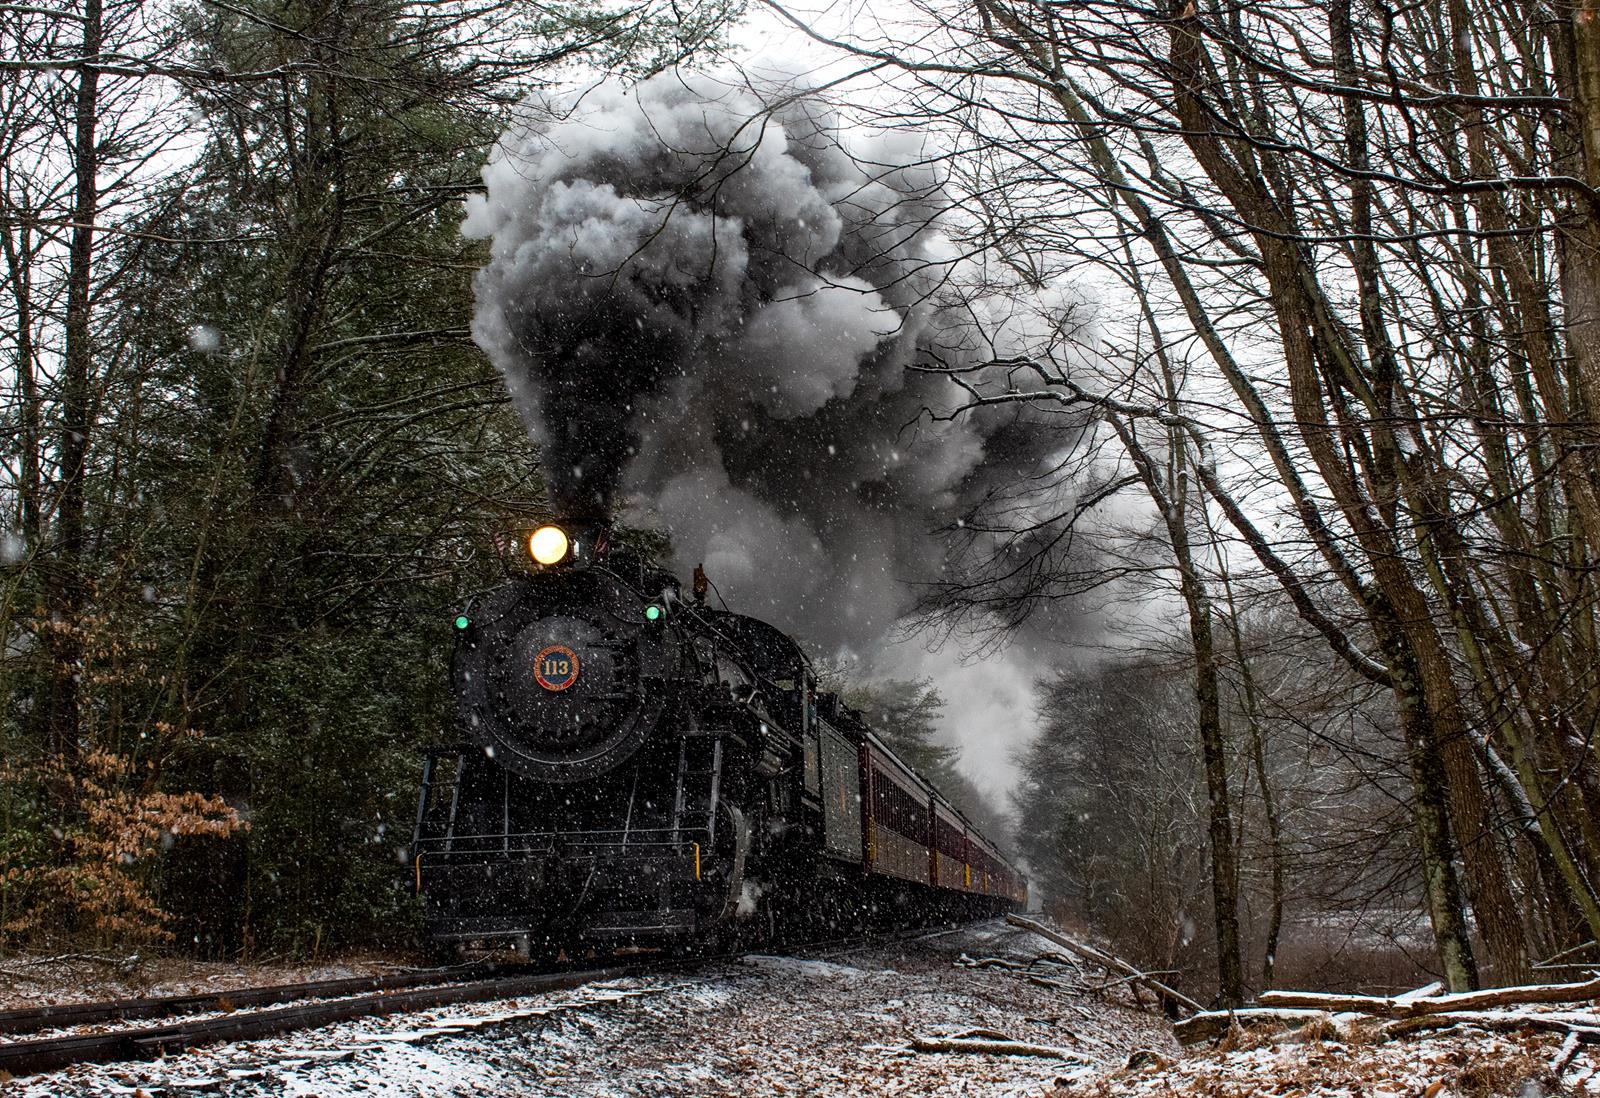 CNJ113 is a class 0-6-0 and  is pictured in Marlin, Pennsylvania, USA.  This was taken along the Pottsville Branch on the Central Railroad of New Jersey. Photo Copyright: Jason Jay uploaded to Railroad Gallery on 12/12/2022. This photograph of CNJ113 was taken on Sunday, December 11, 2022. All Rights Reserved. 